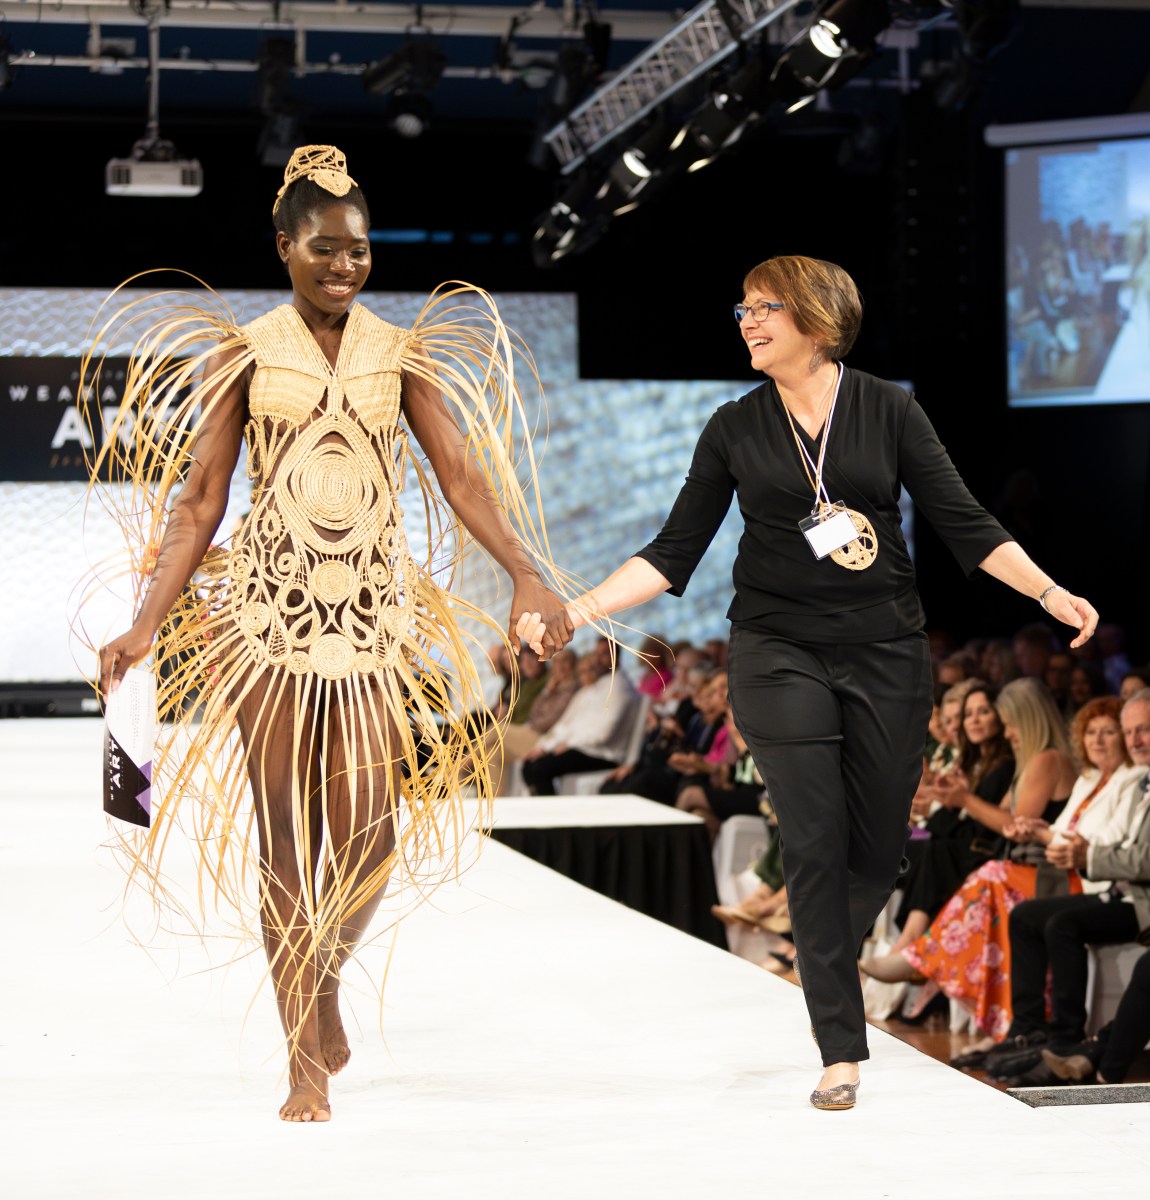 A woman walks down a catwalk in an elaborate costume made out of woven yellow reeds. She is holding hands with a designer who is all in black and smiles at her.